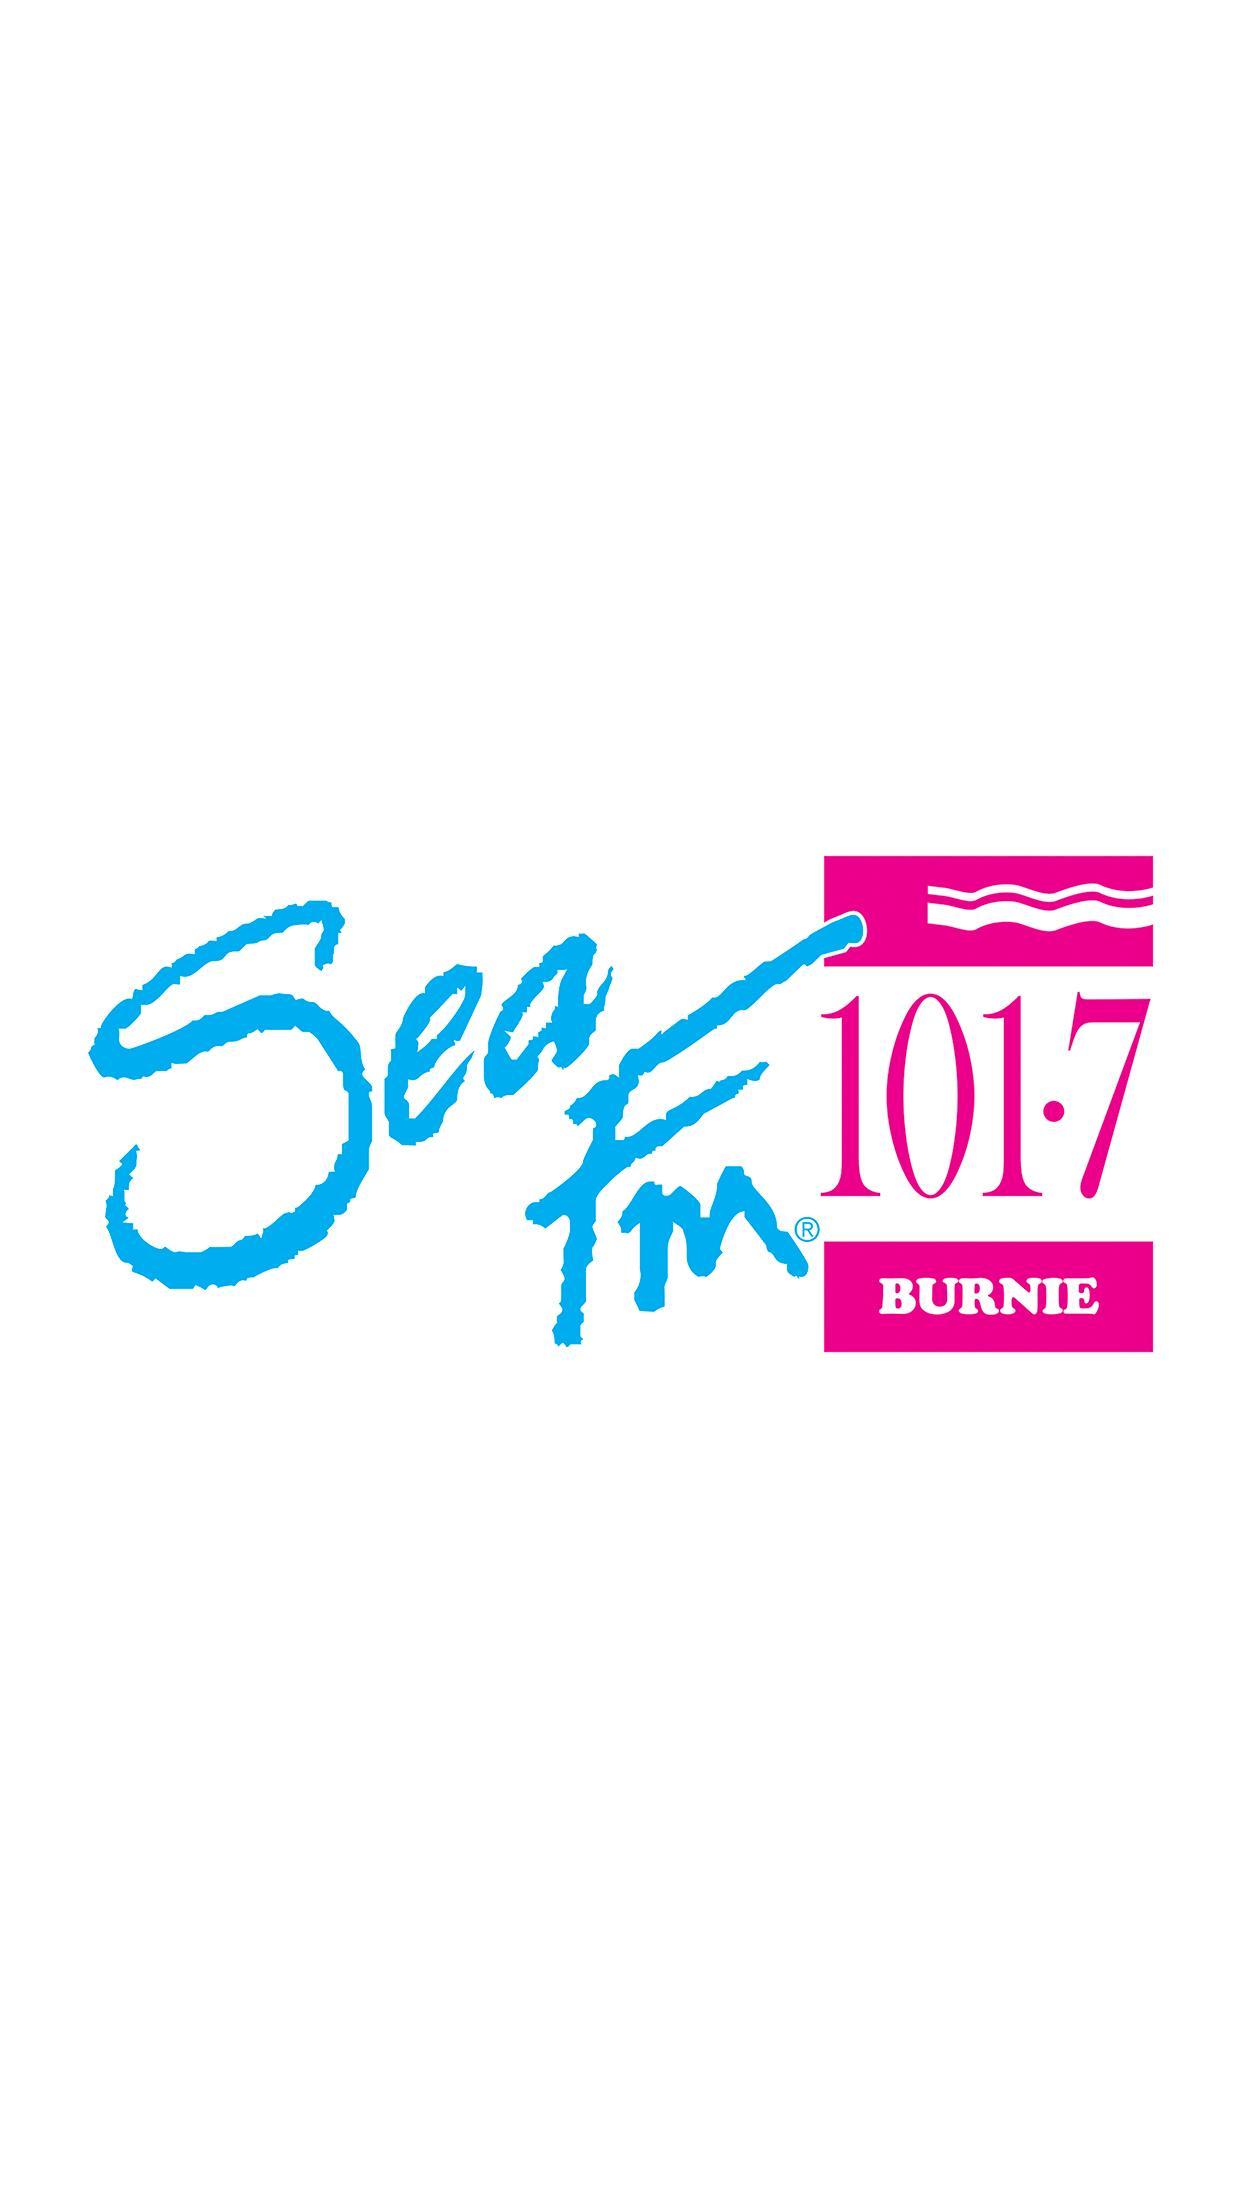 101.7 Sea FM Burnie for Android - APK Download